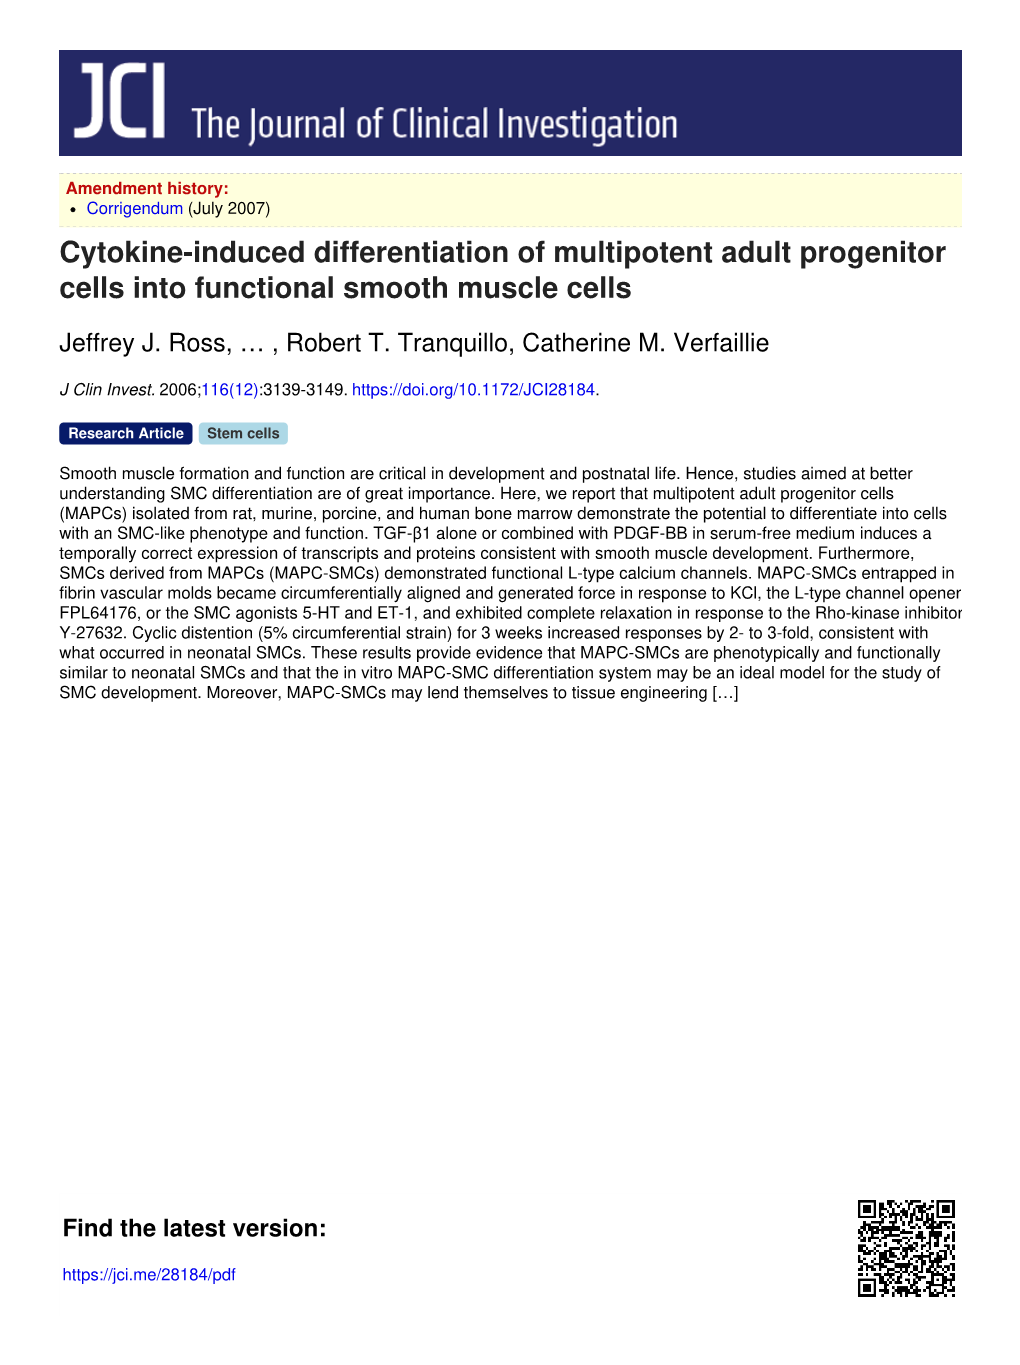 Cytokine-Induced Differentiation of Multipotent Adult Progenitor Cells Into Functional Smooth Muscle Cells